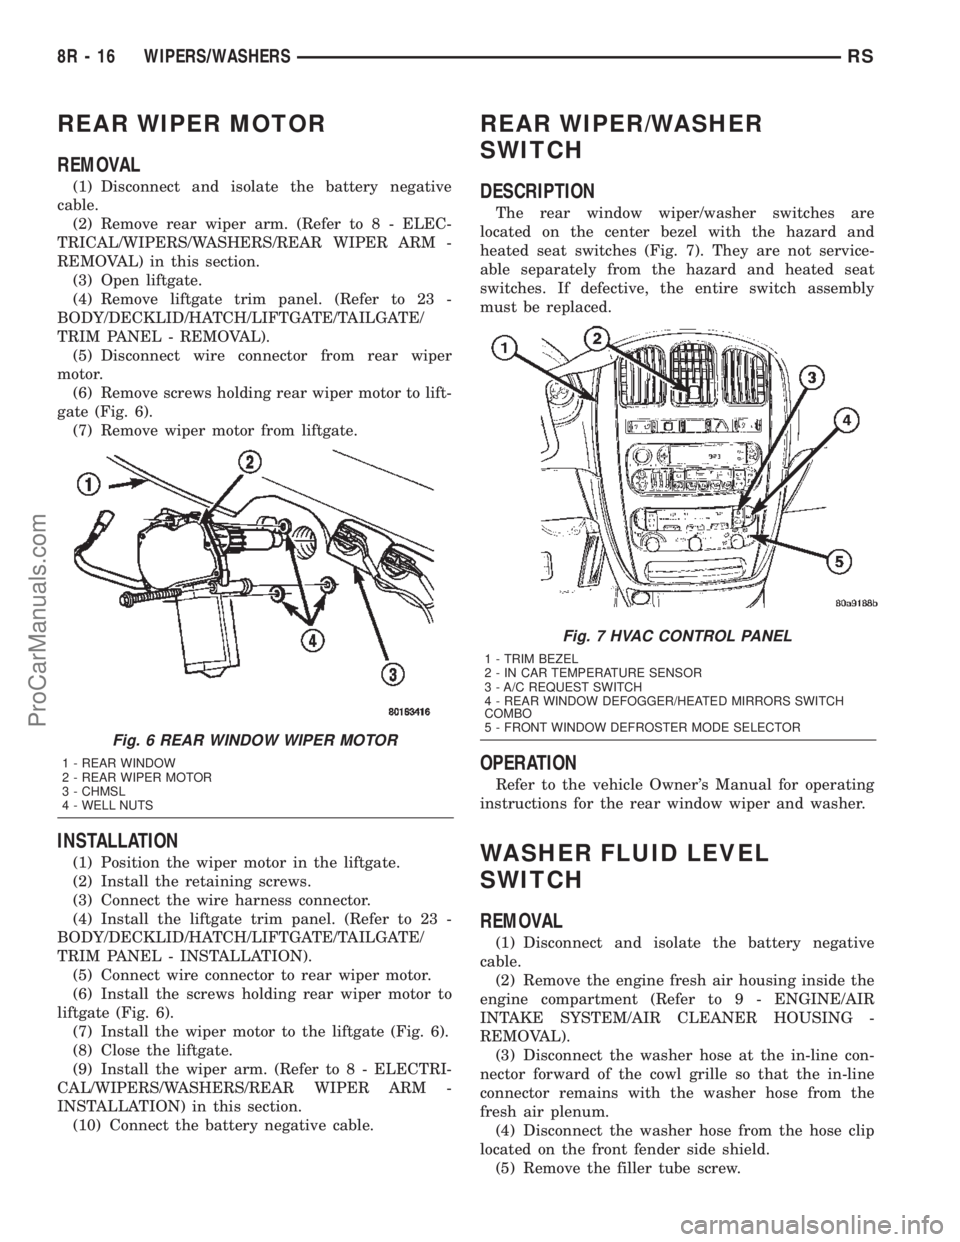 CHRYSLER VOYAGER 2002  Service Manual REAR WIPER MOTOR
REMOVAL
(1) Disconnect and isolate the battery negative
cable.
(2) Remove rear wiper arm. (Refer to 8 - ELEC-
TRICAL/WIPERS/WASHERS/REAR WIPER ARM -
REMOVAL) in this section.
(3) Open